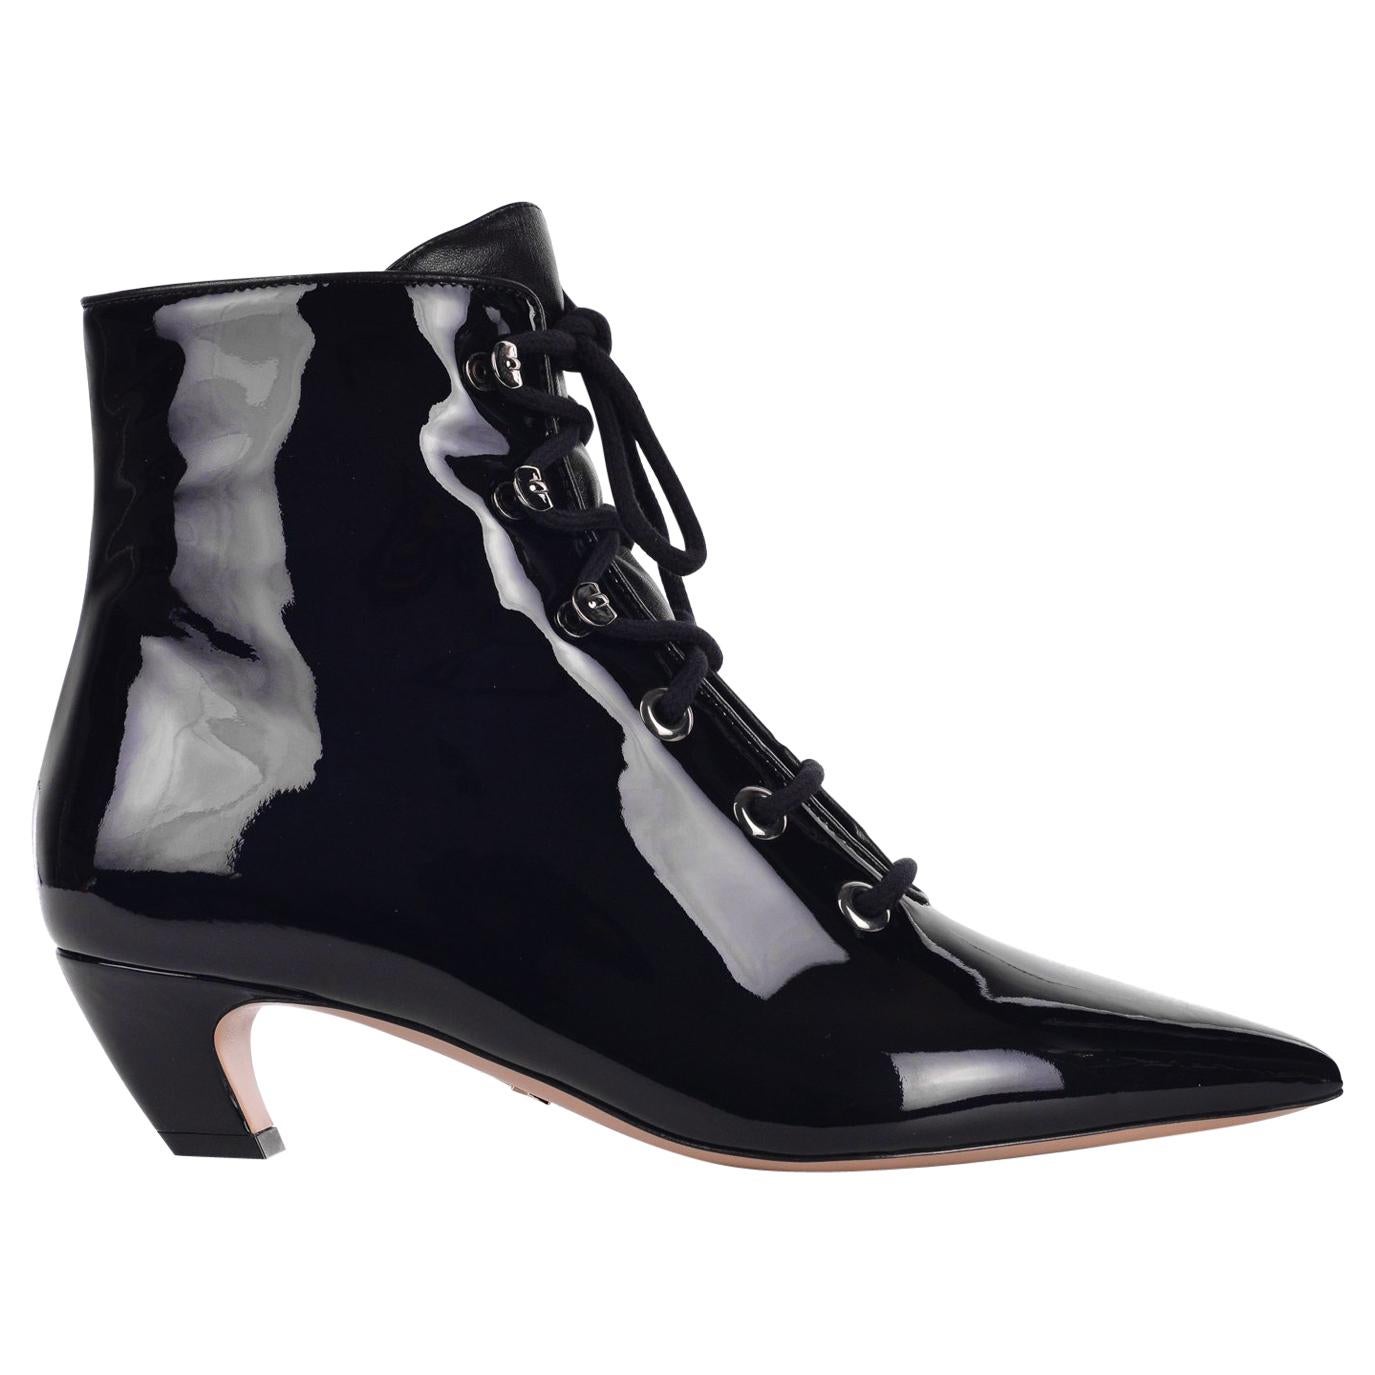 Dior Women's I-Dior Black Patent Leather Lace Up Boots im Angebot